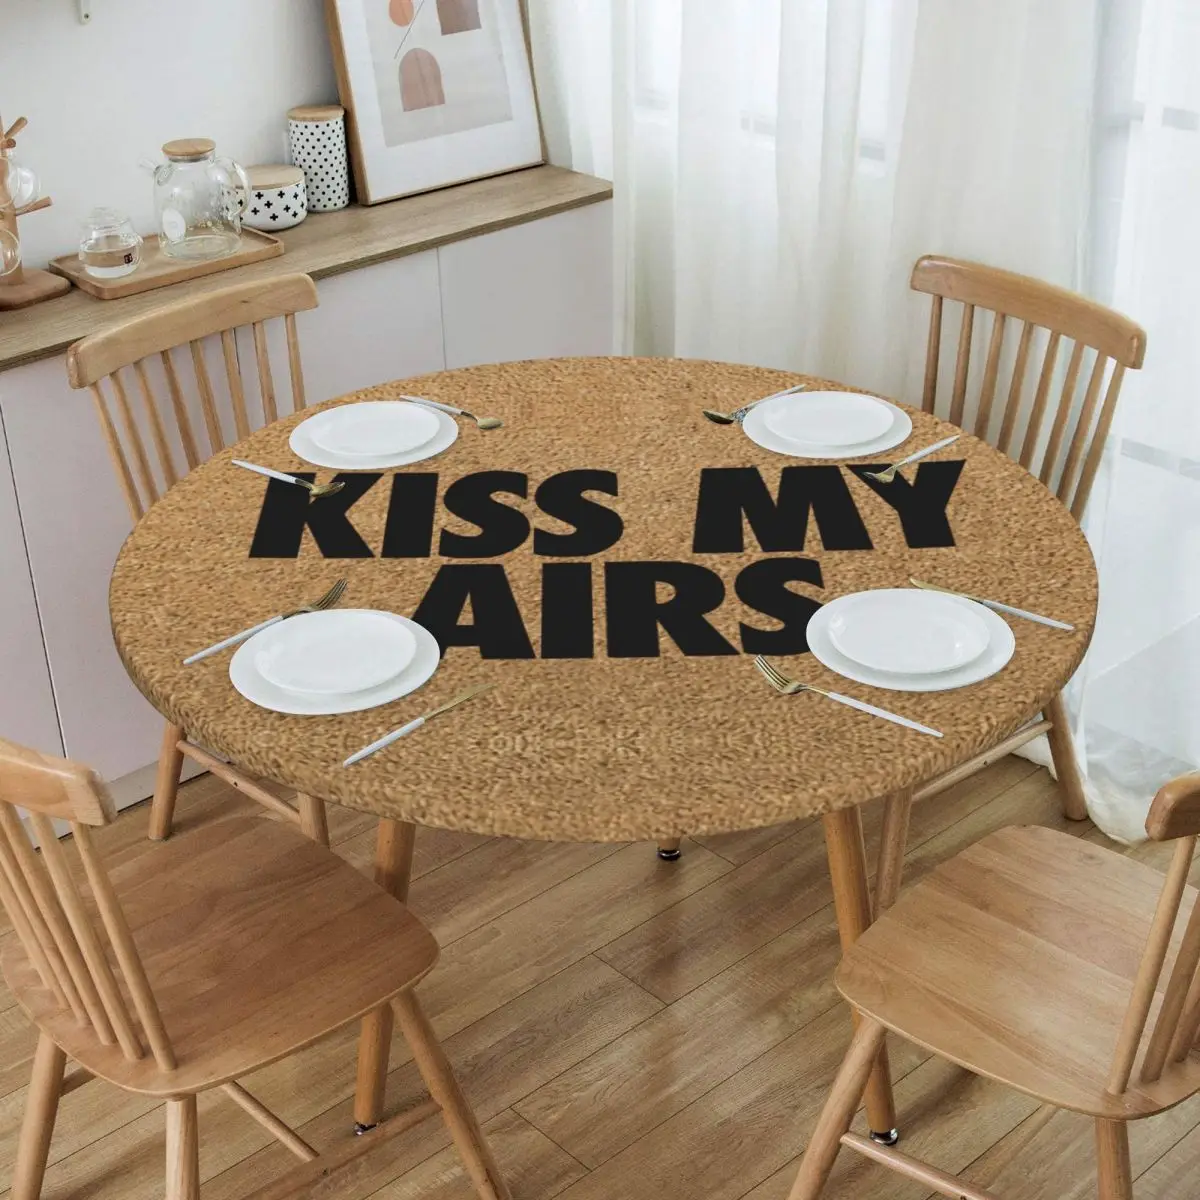 

Round Waterproof Kiss My Airs Table Cover Fitted Table Cloth Backed Edge Tablecloth for Dining